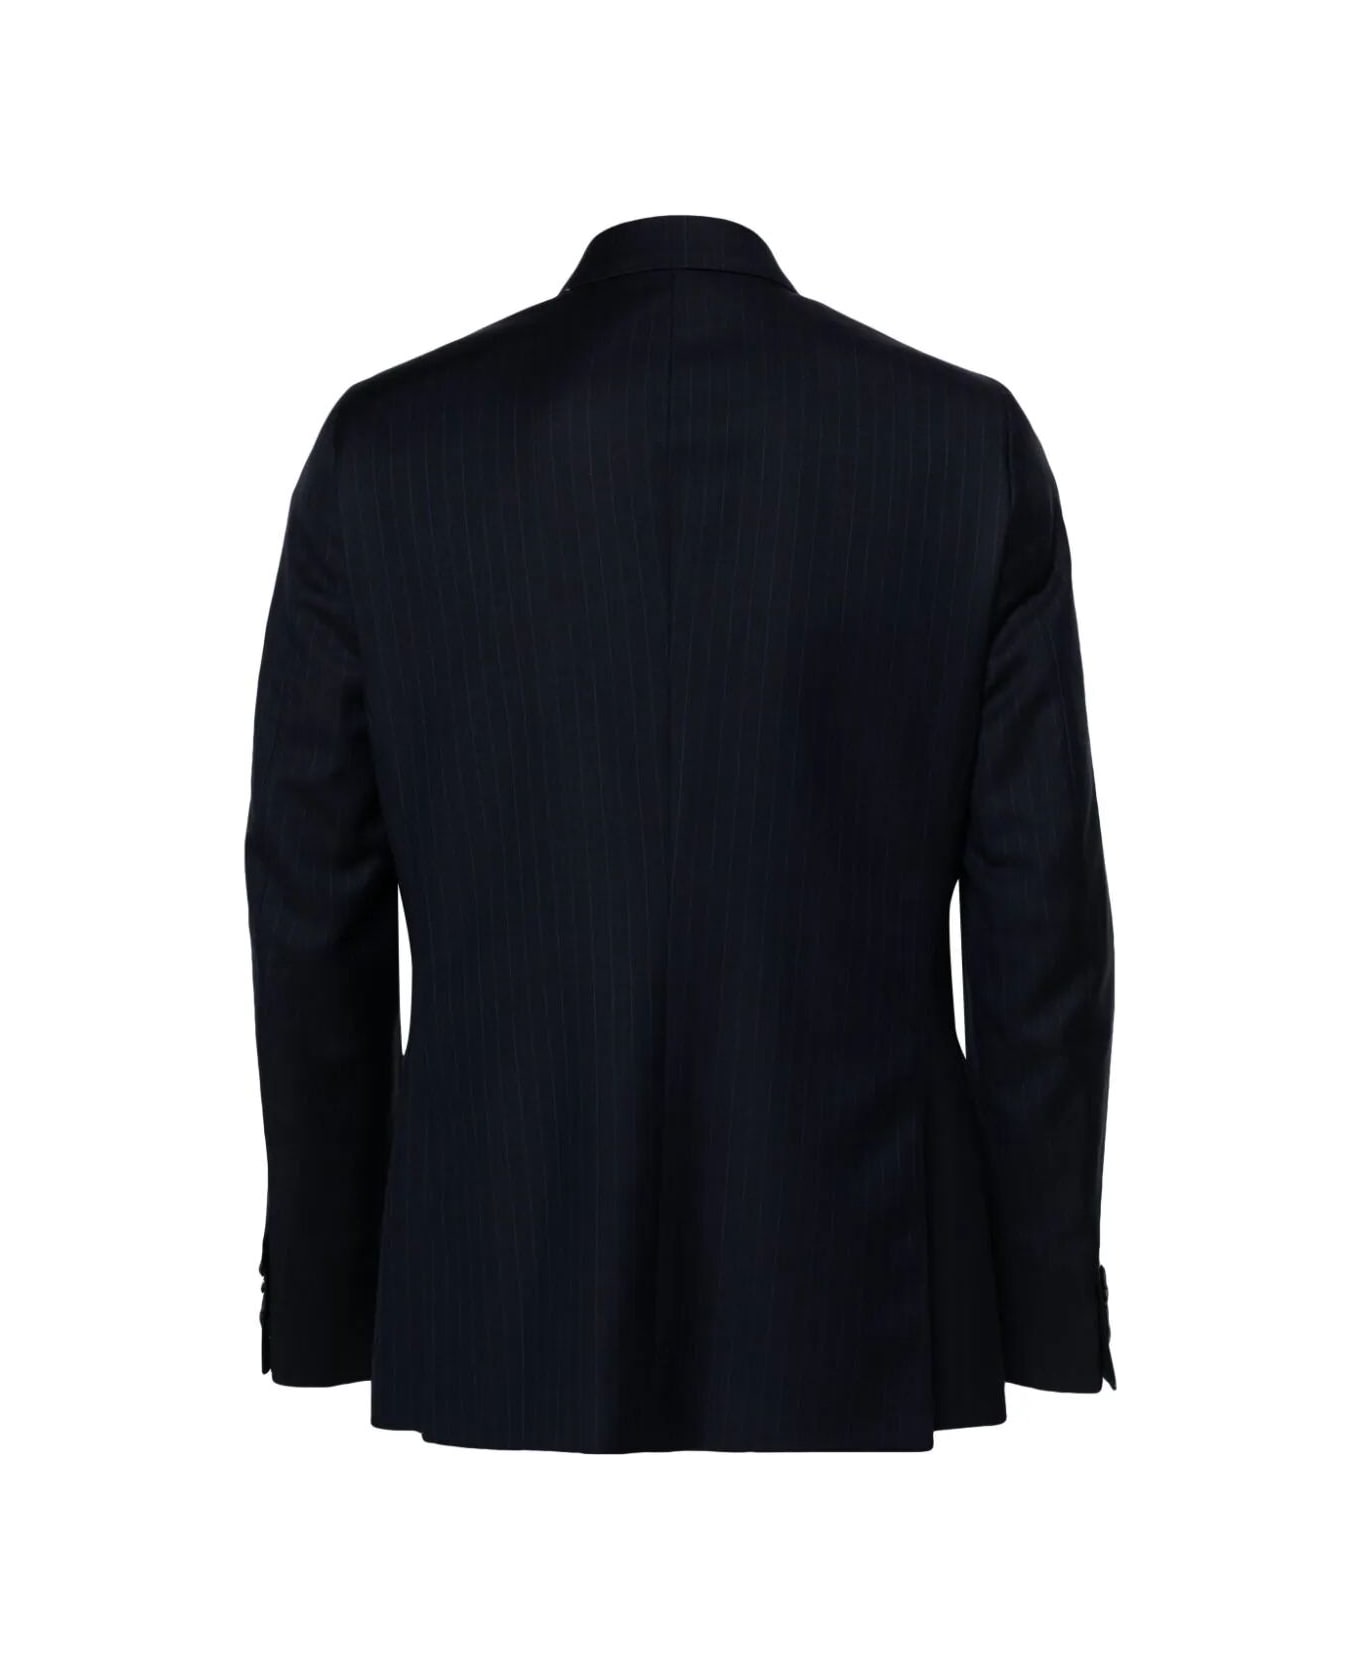 Paul Smith Mens Two Buttons Jacket - Dark Navy